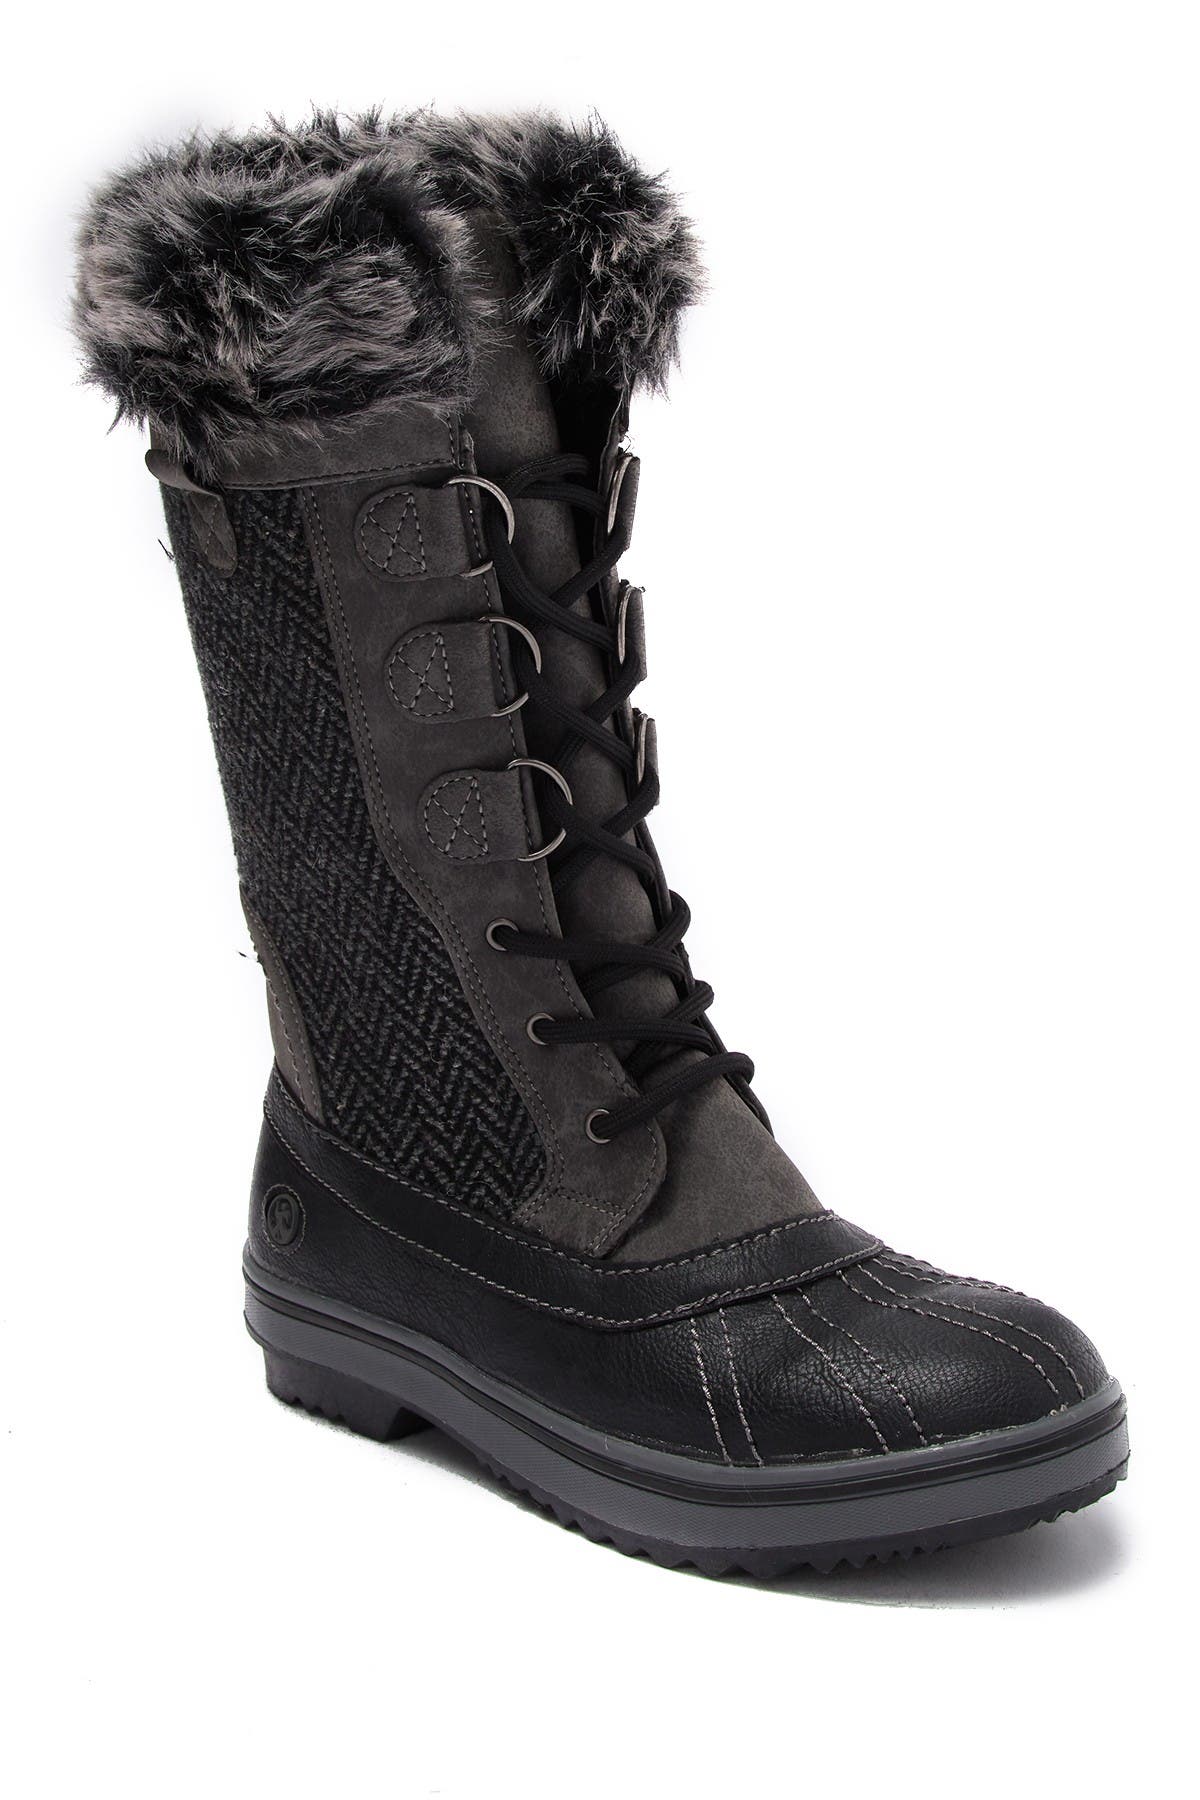 Bishop Faux Fur Lined Winter Boot 